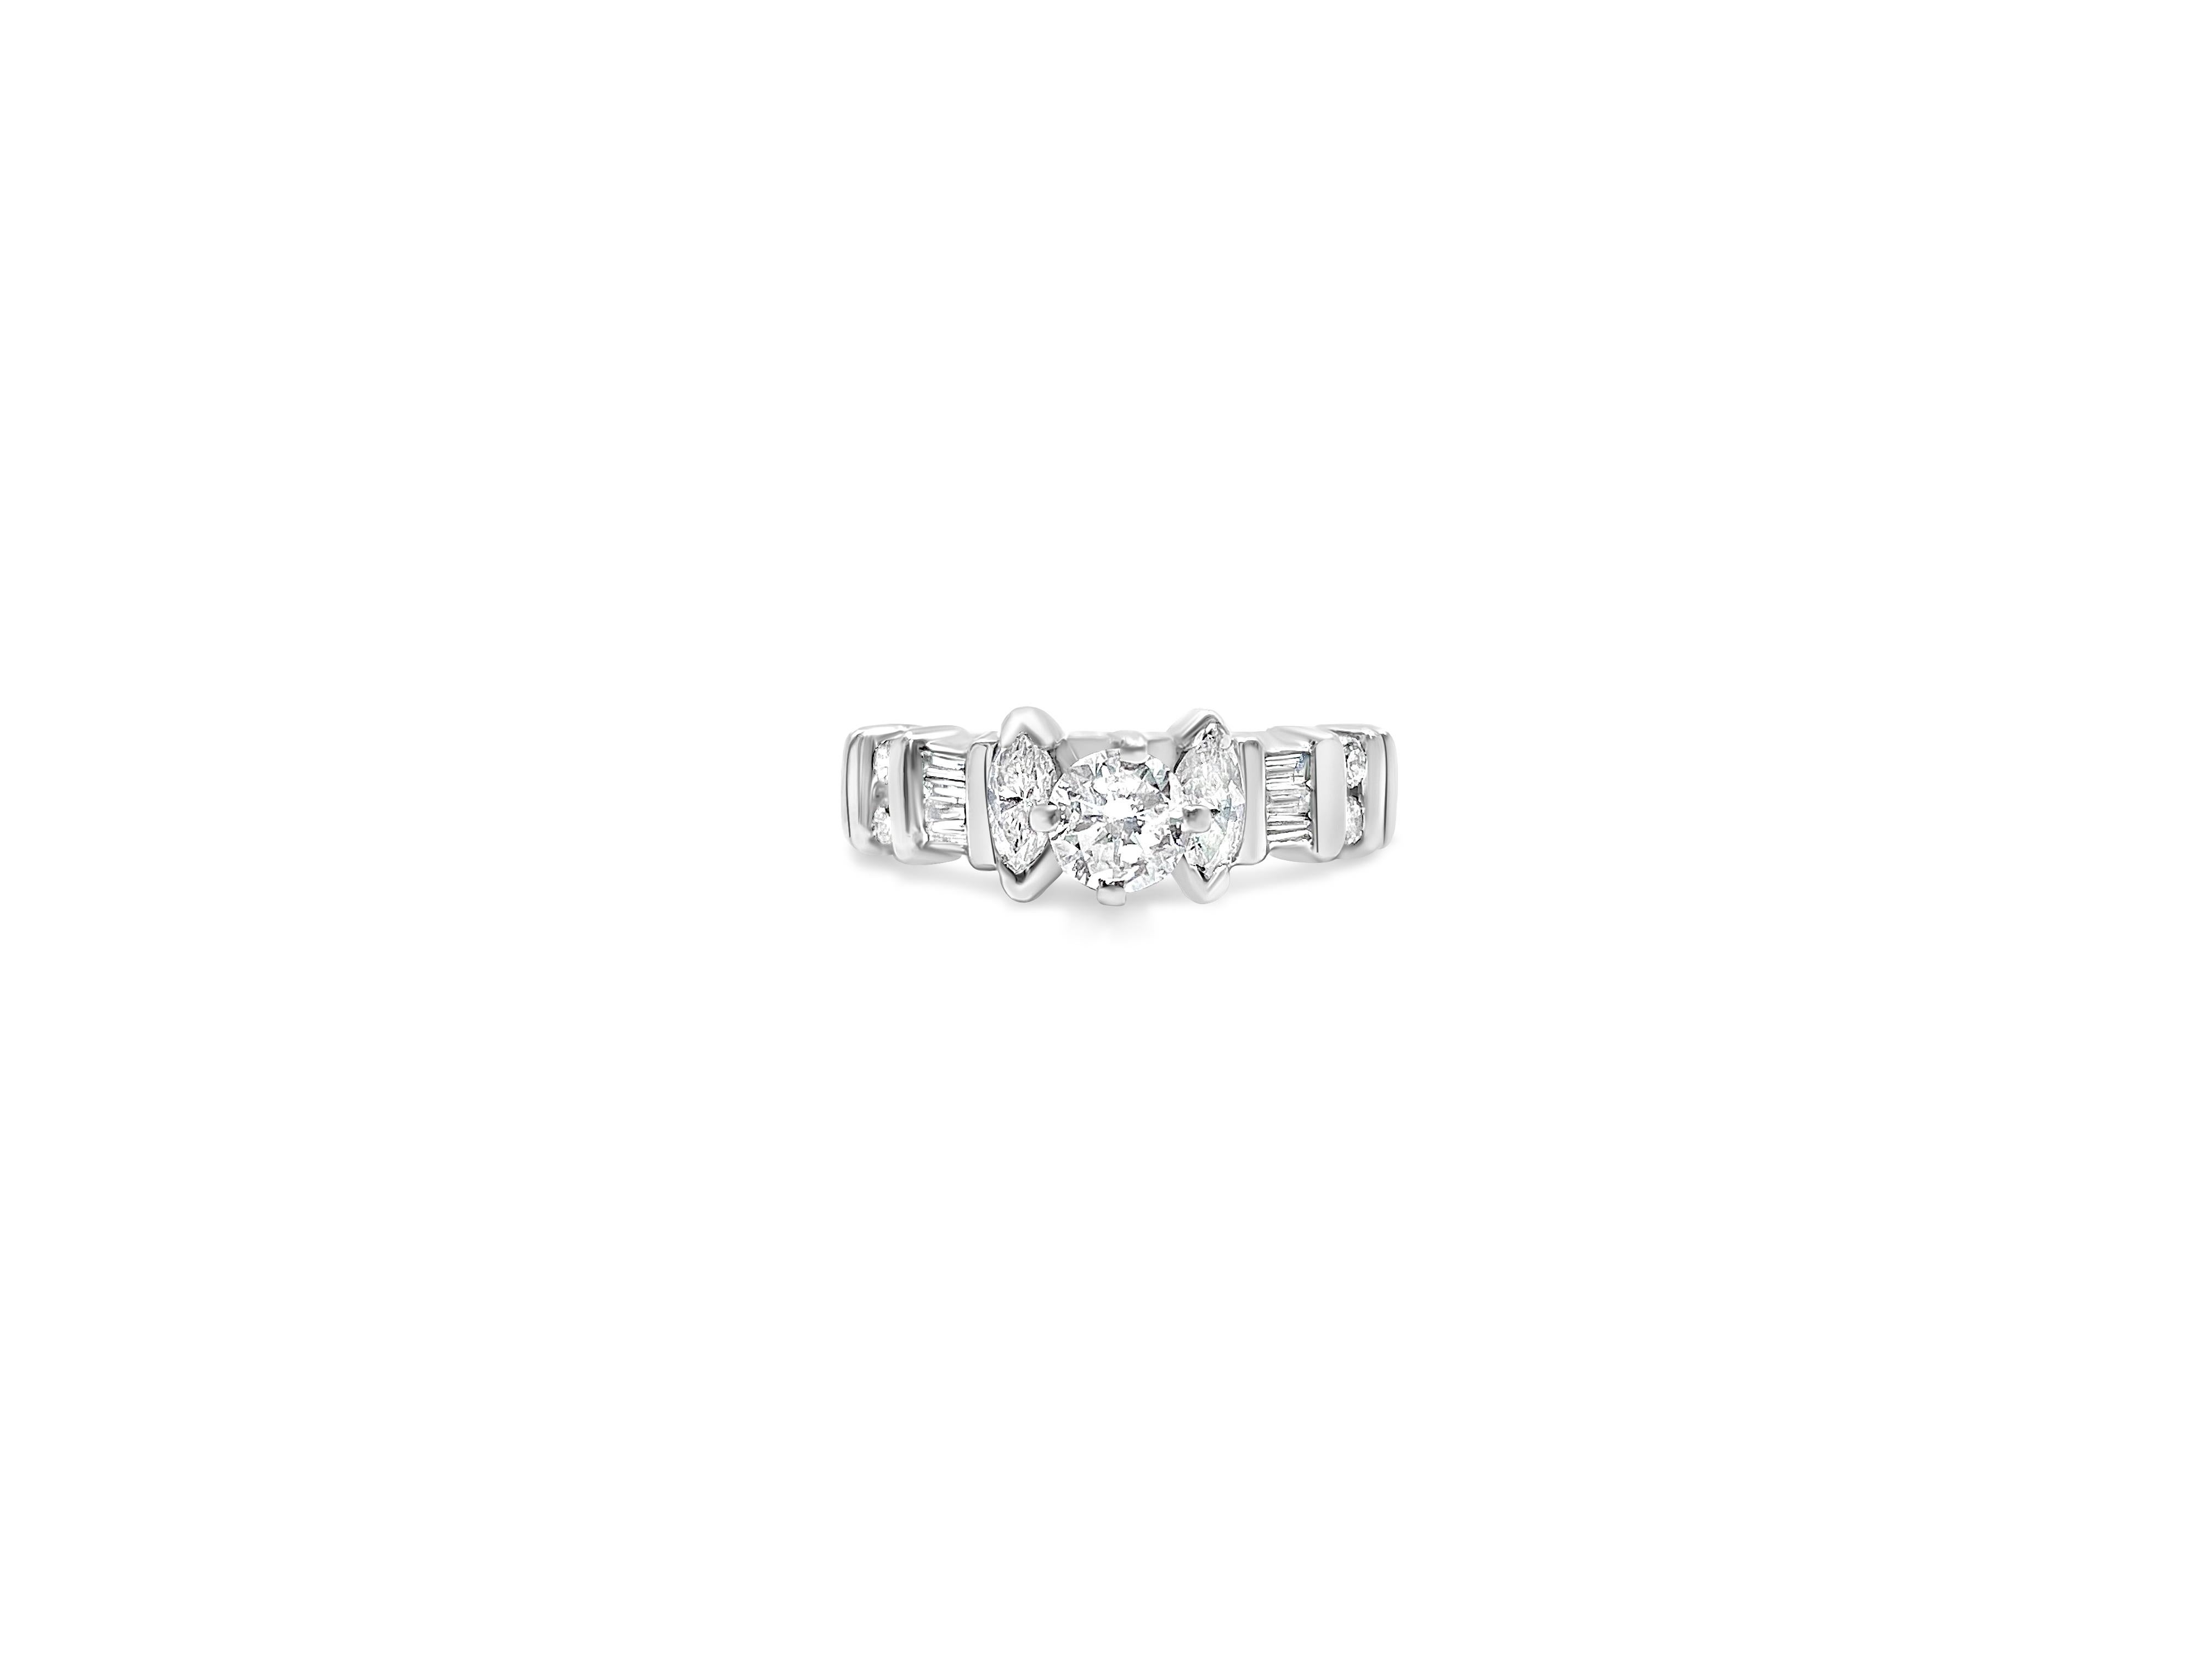 Fashioned in exquisite 10k white gold, this vintage diamond ring showcases a total of 1.50 carats of natural earth-mined diamonds. With a mix of VS-SI clarity and G color, these round brilliant cut diamonds offer captivating sparkle and brilliance.